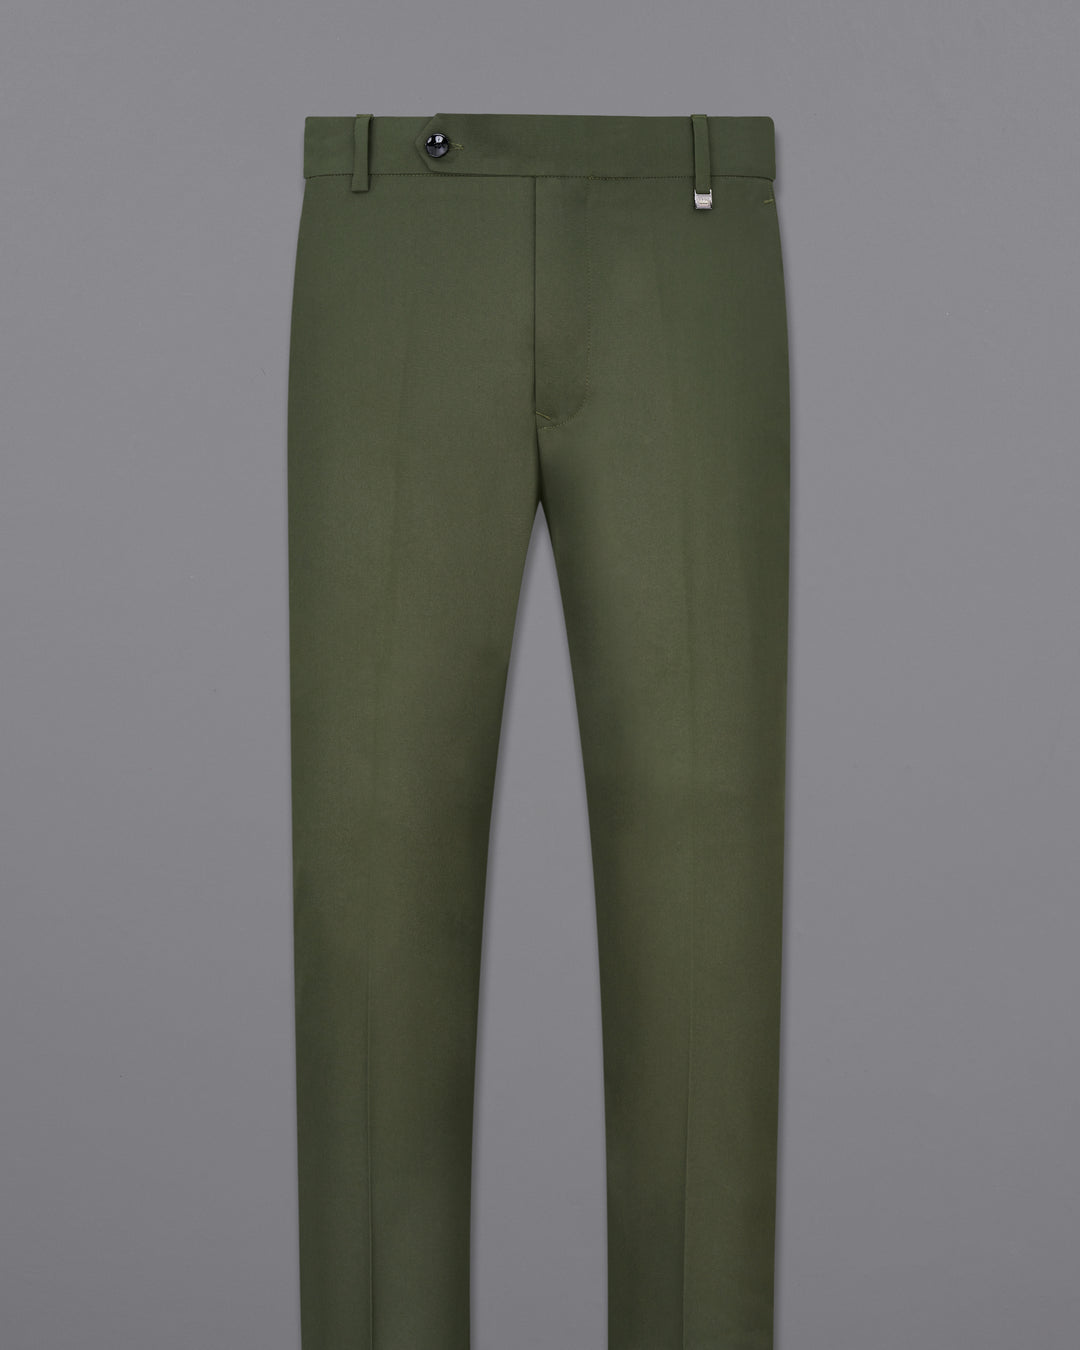 What Color Pants Goes With Olive Green Shirt Black Trousers Outfit